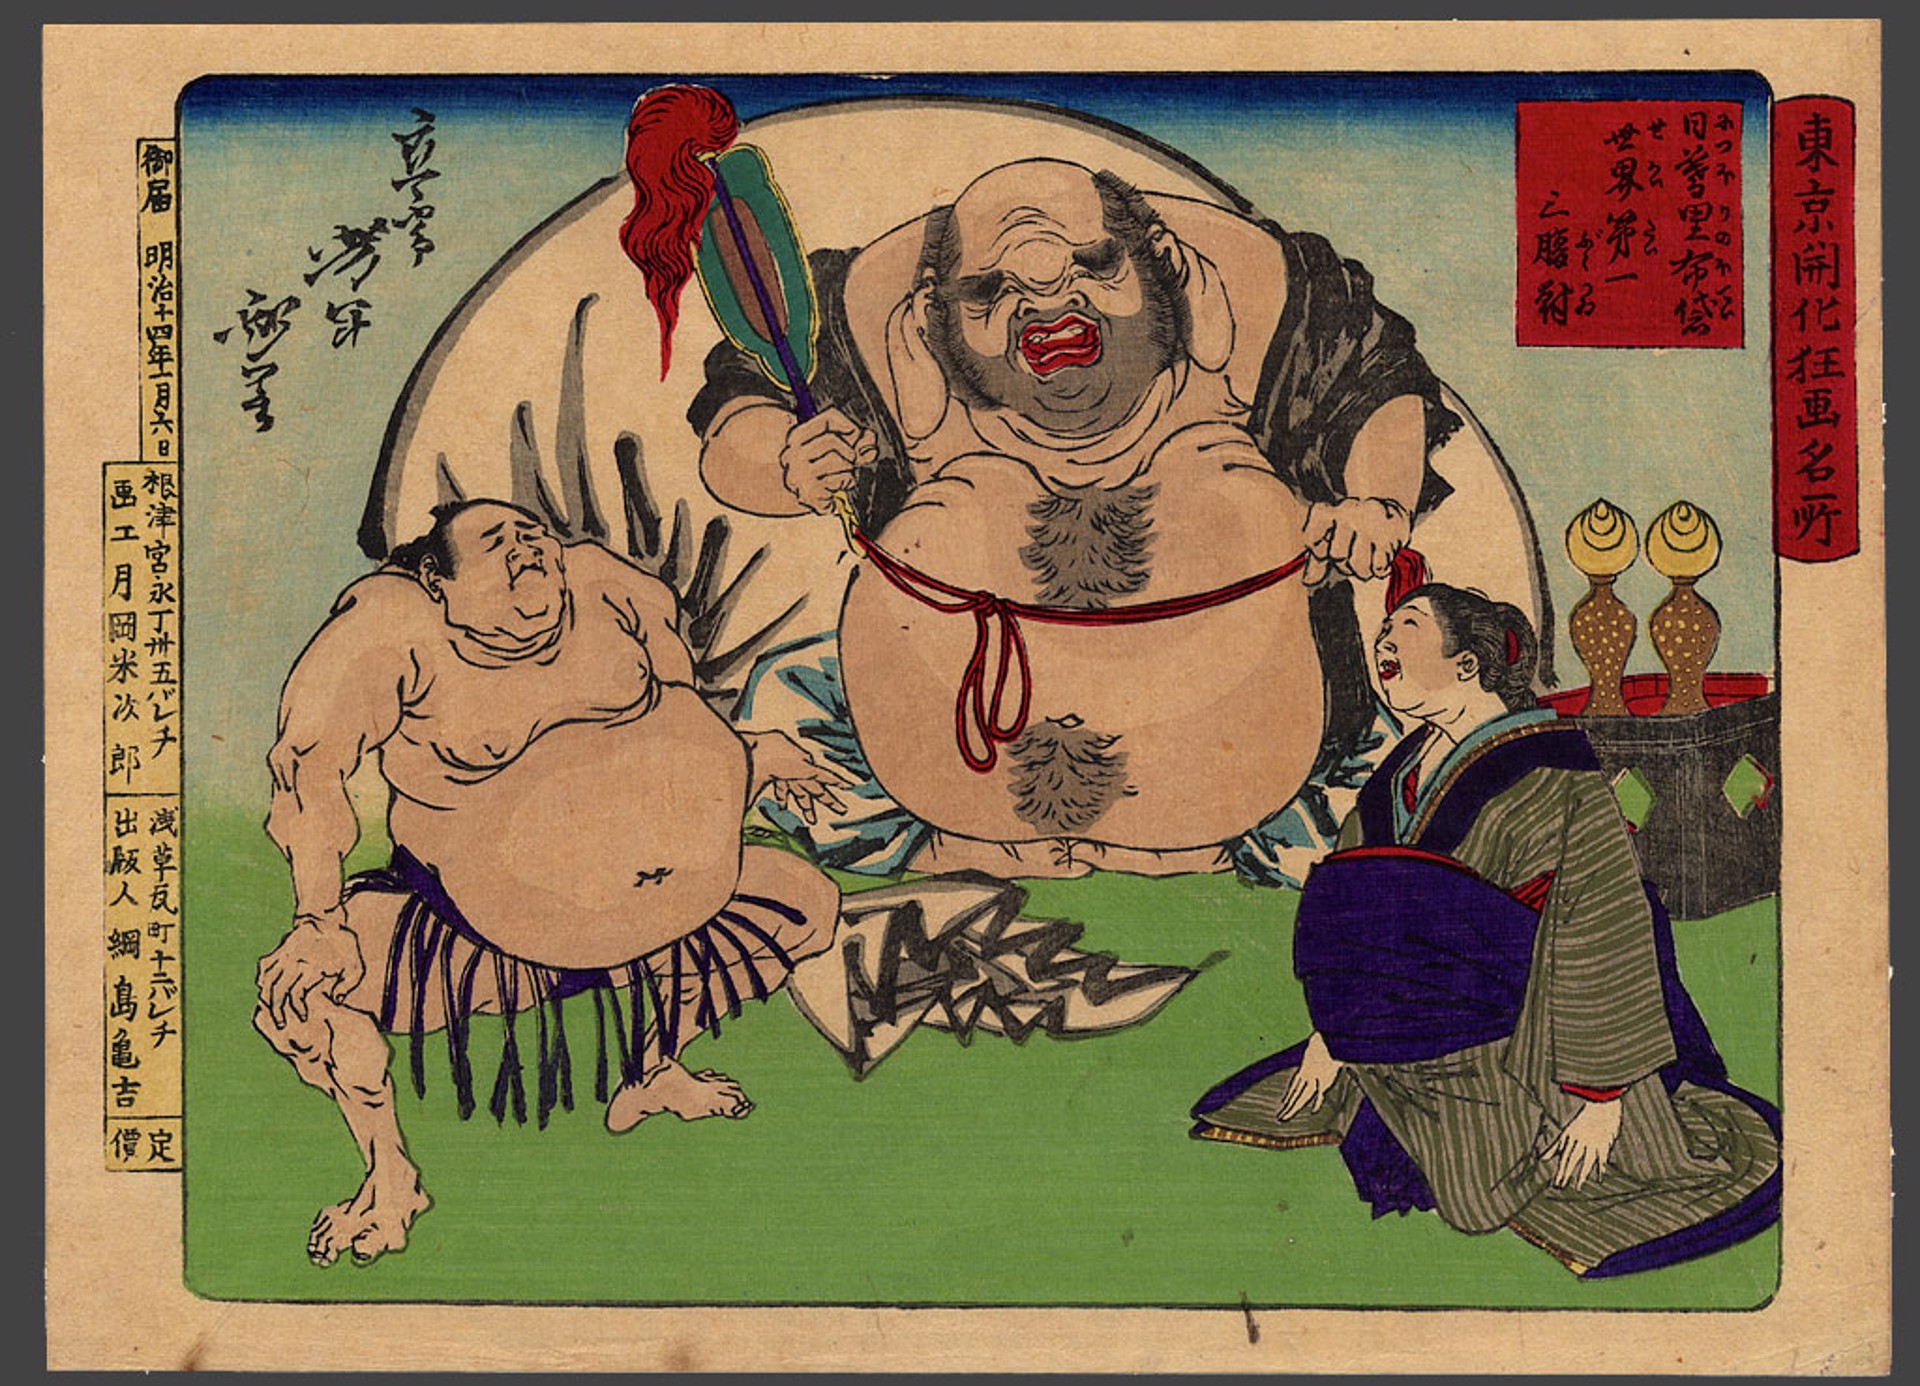 The Hotei of Nippori, one of the worlds three largest bellies Comic pictures of famous places amid the civiization of Tokyo by Yoshitoshi